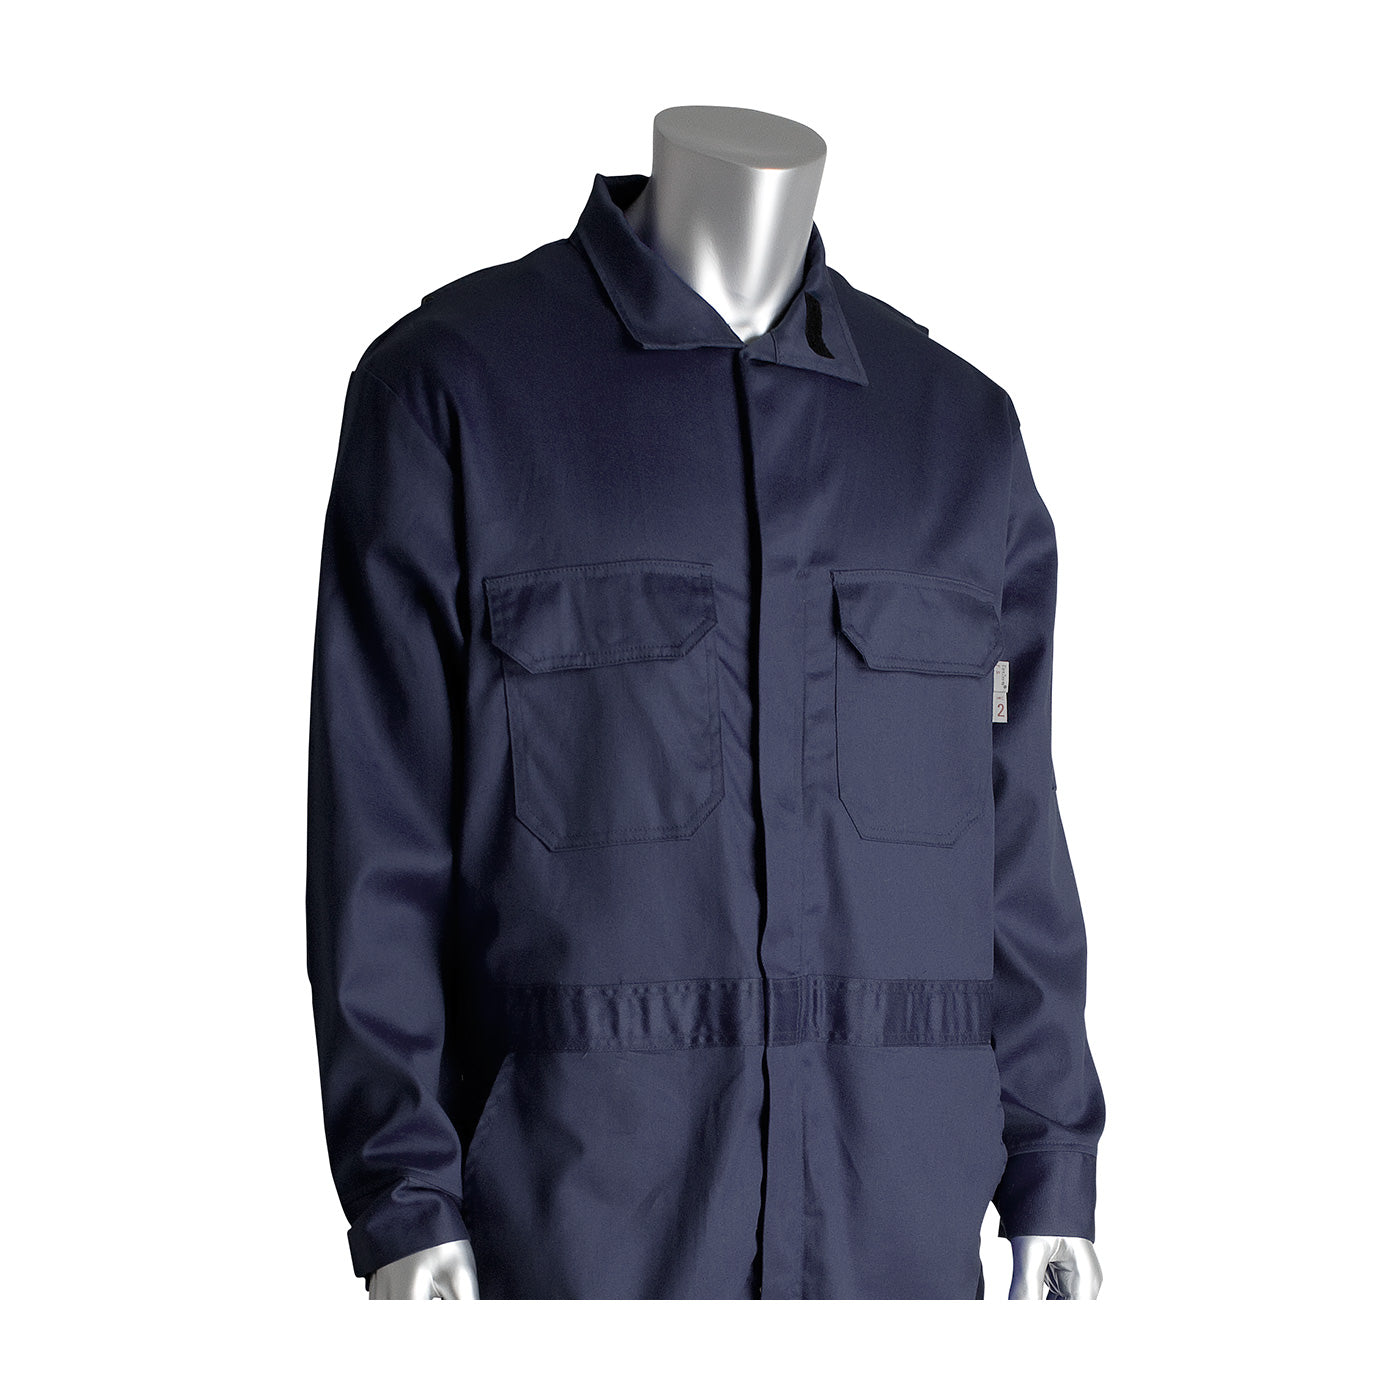 PIP 385-FRSC-KH/3X AR/FR Dual Certified Coverall with Zipper Closure - 9.2 Cal/cm2